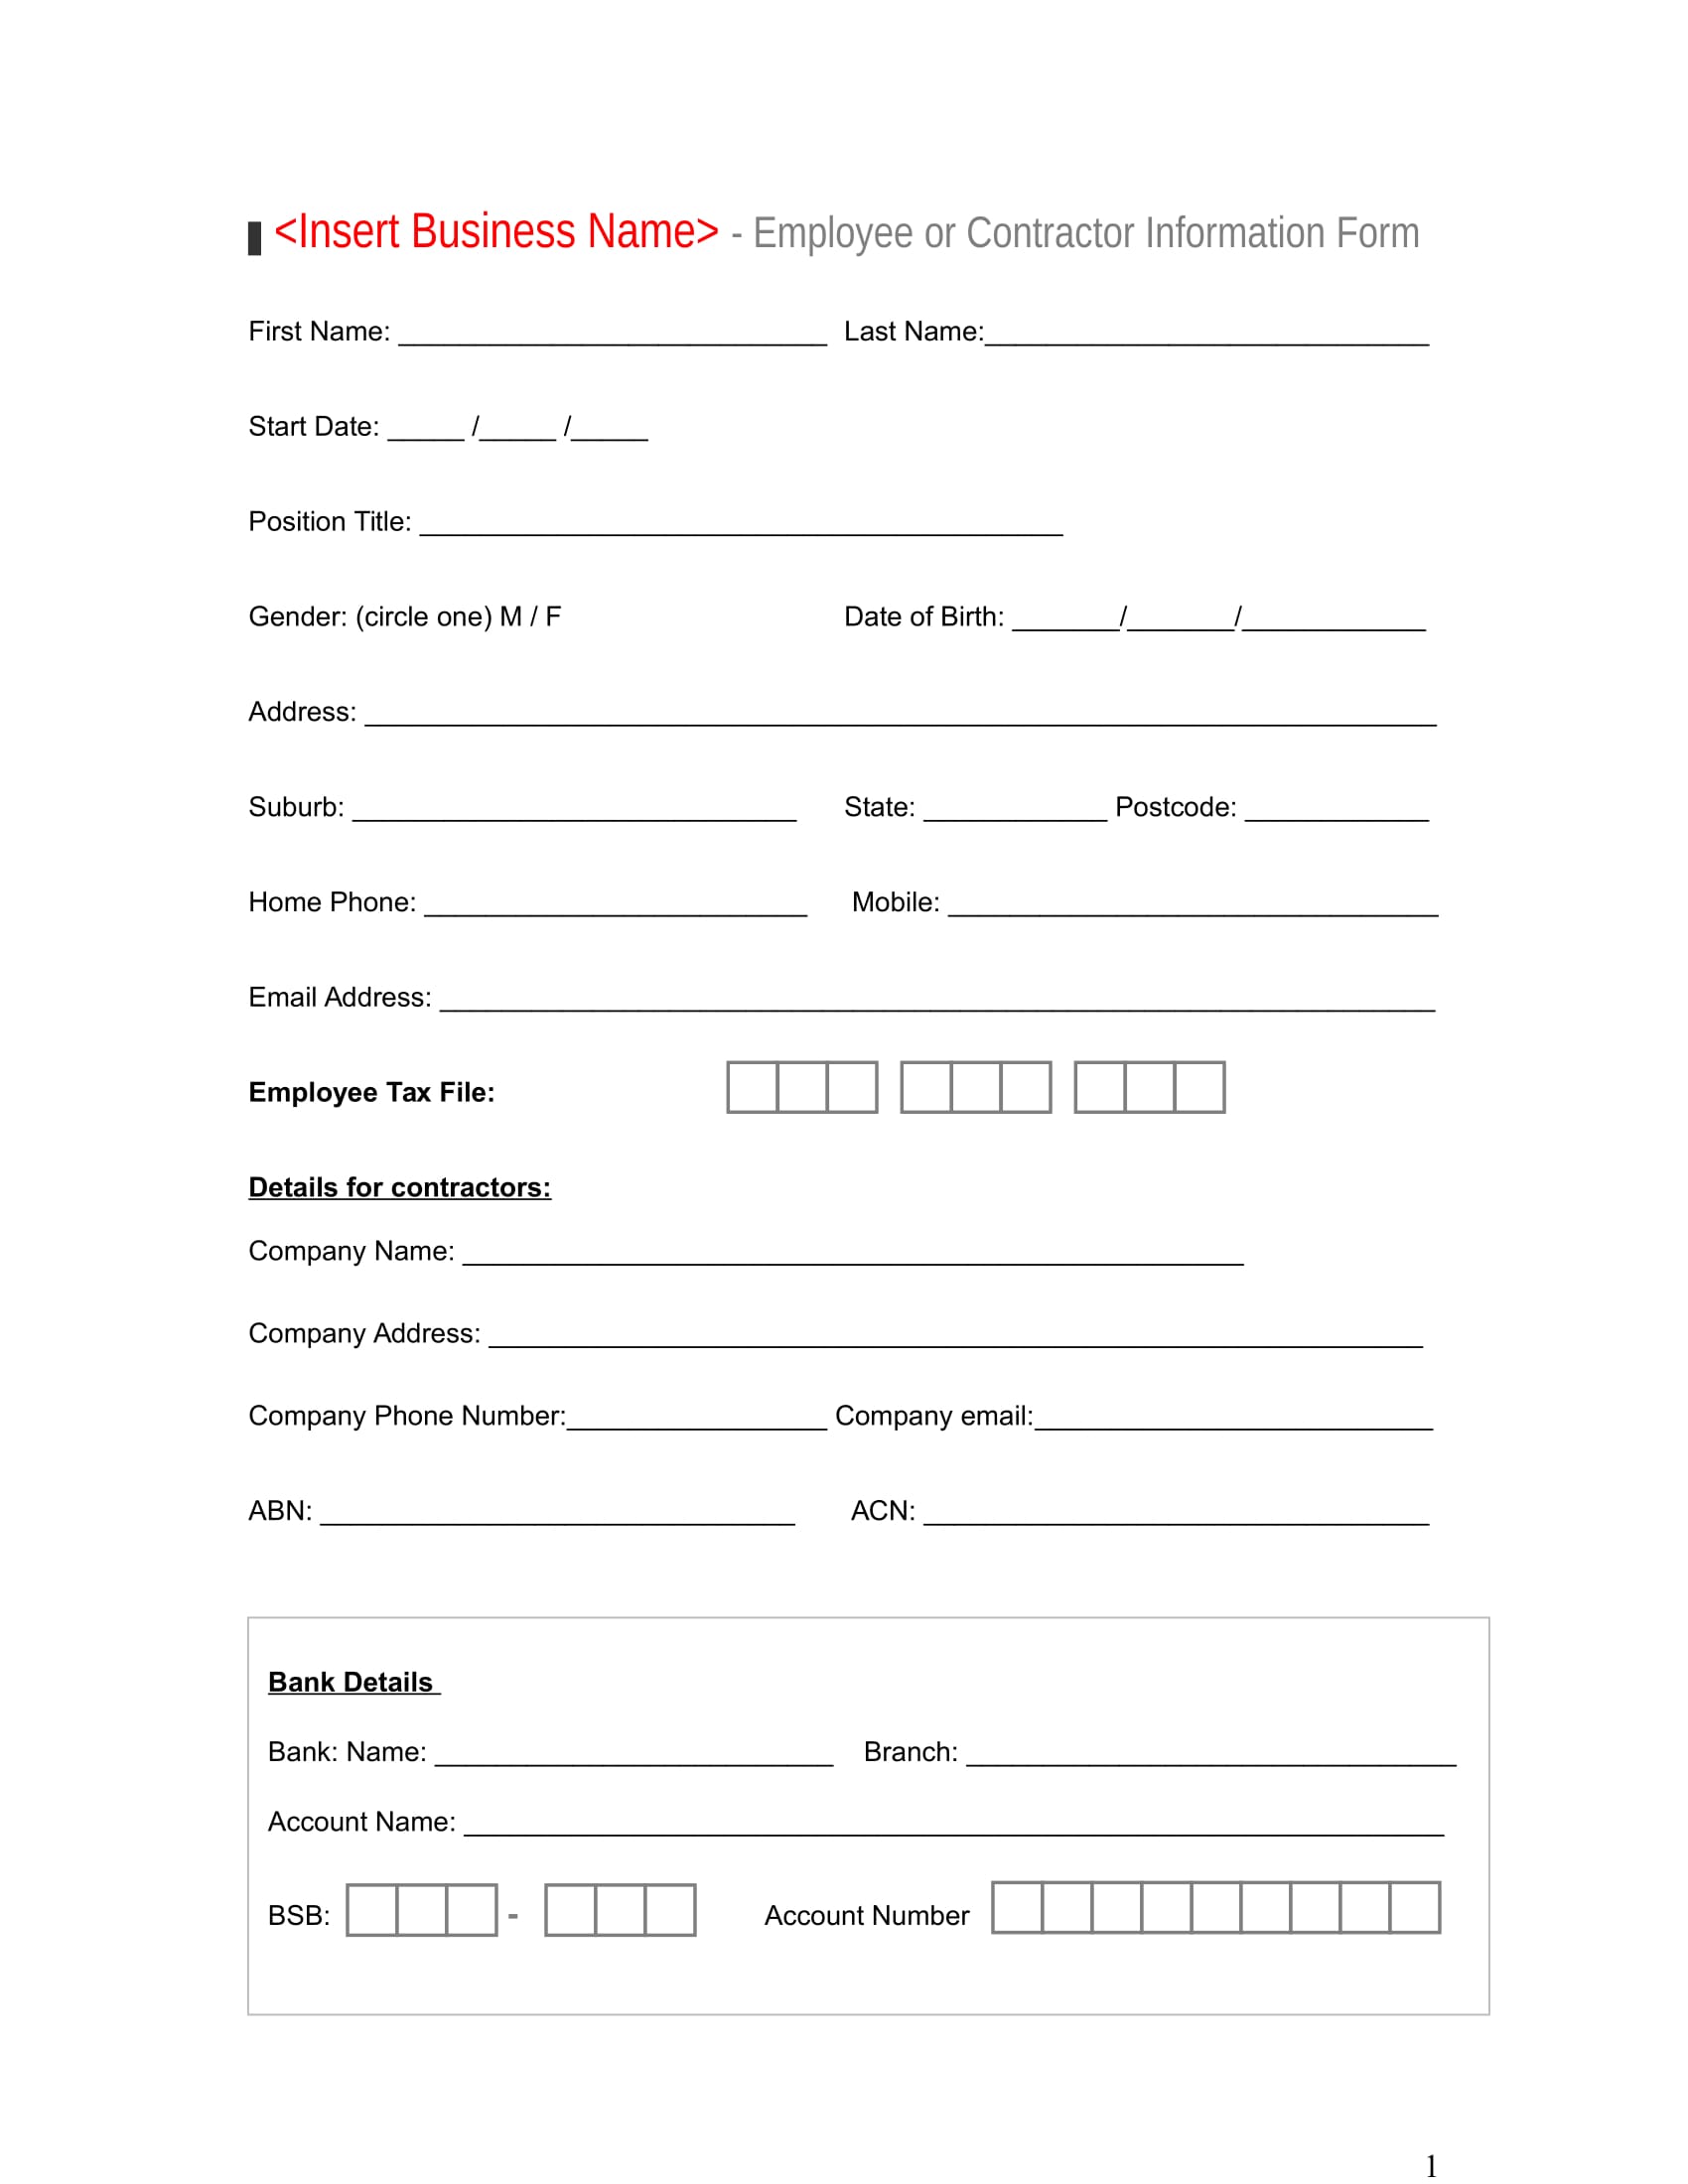 employee or contractor information form 1